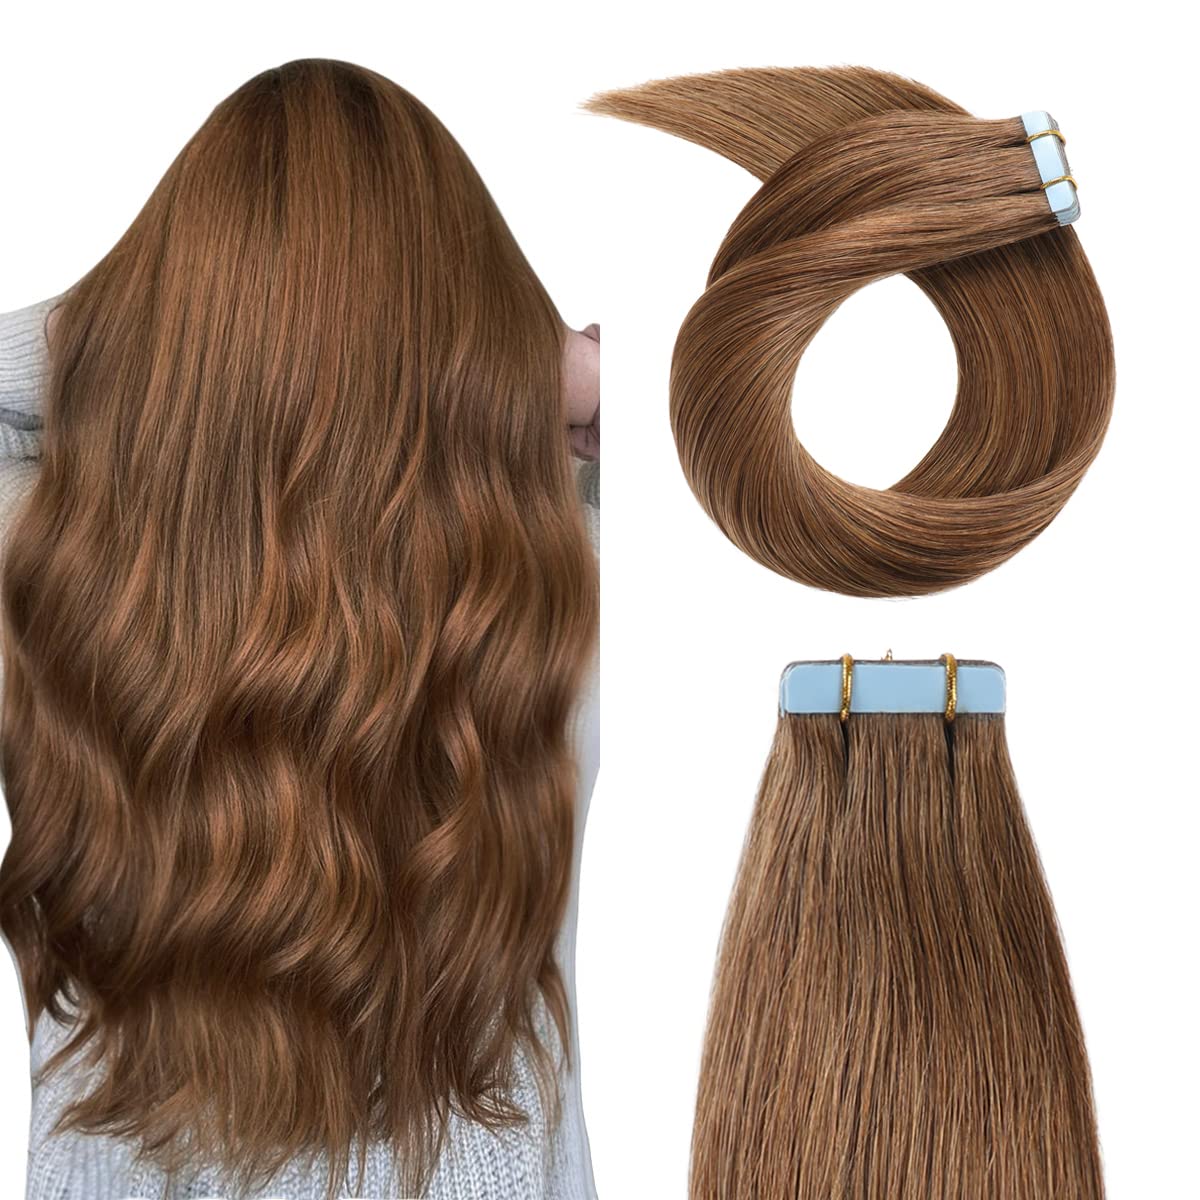 YILITE Tape in Human Hair Extensions 12 inch - 24 inch 20pcs 50g Silky Straight Human Hair Extensions Tape in #6 Chestnut Brown Real Human Hair